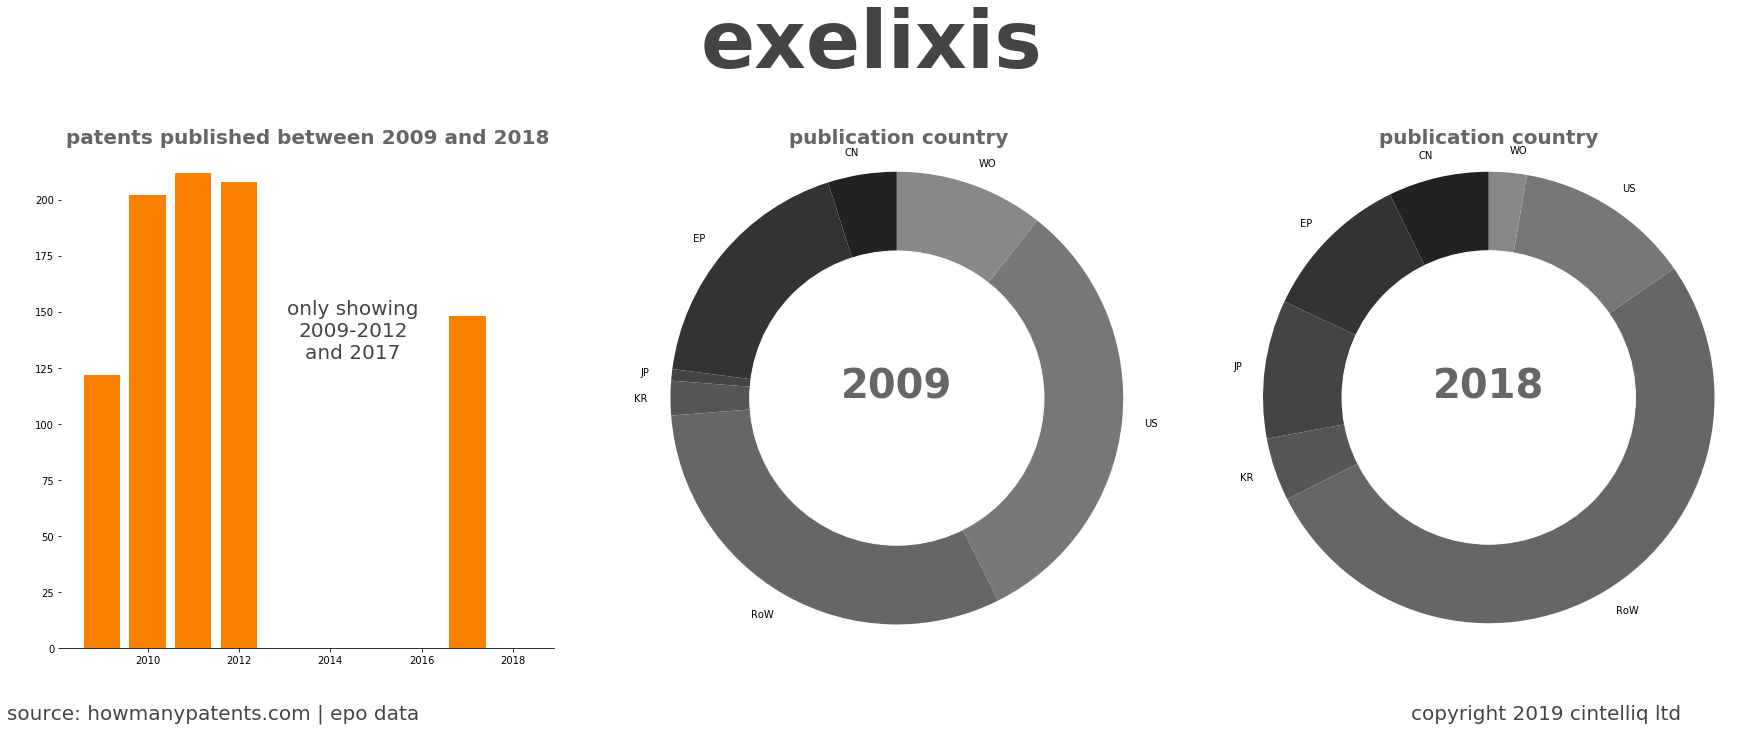 summary of patents for Exelixis